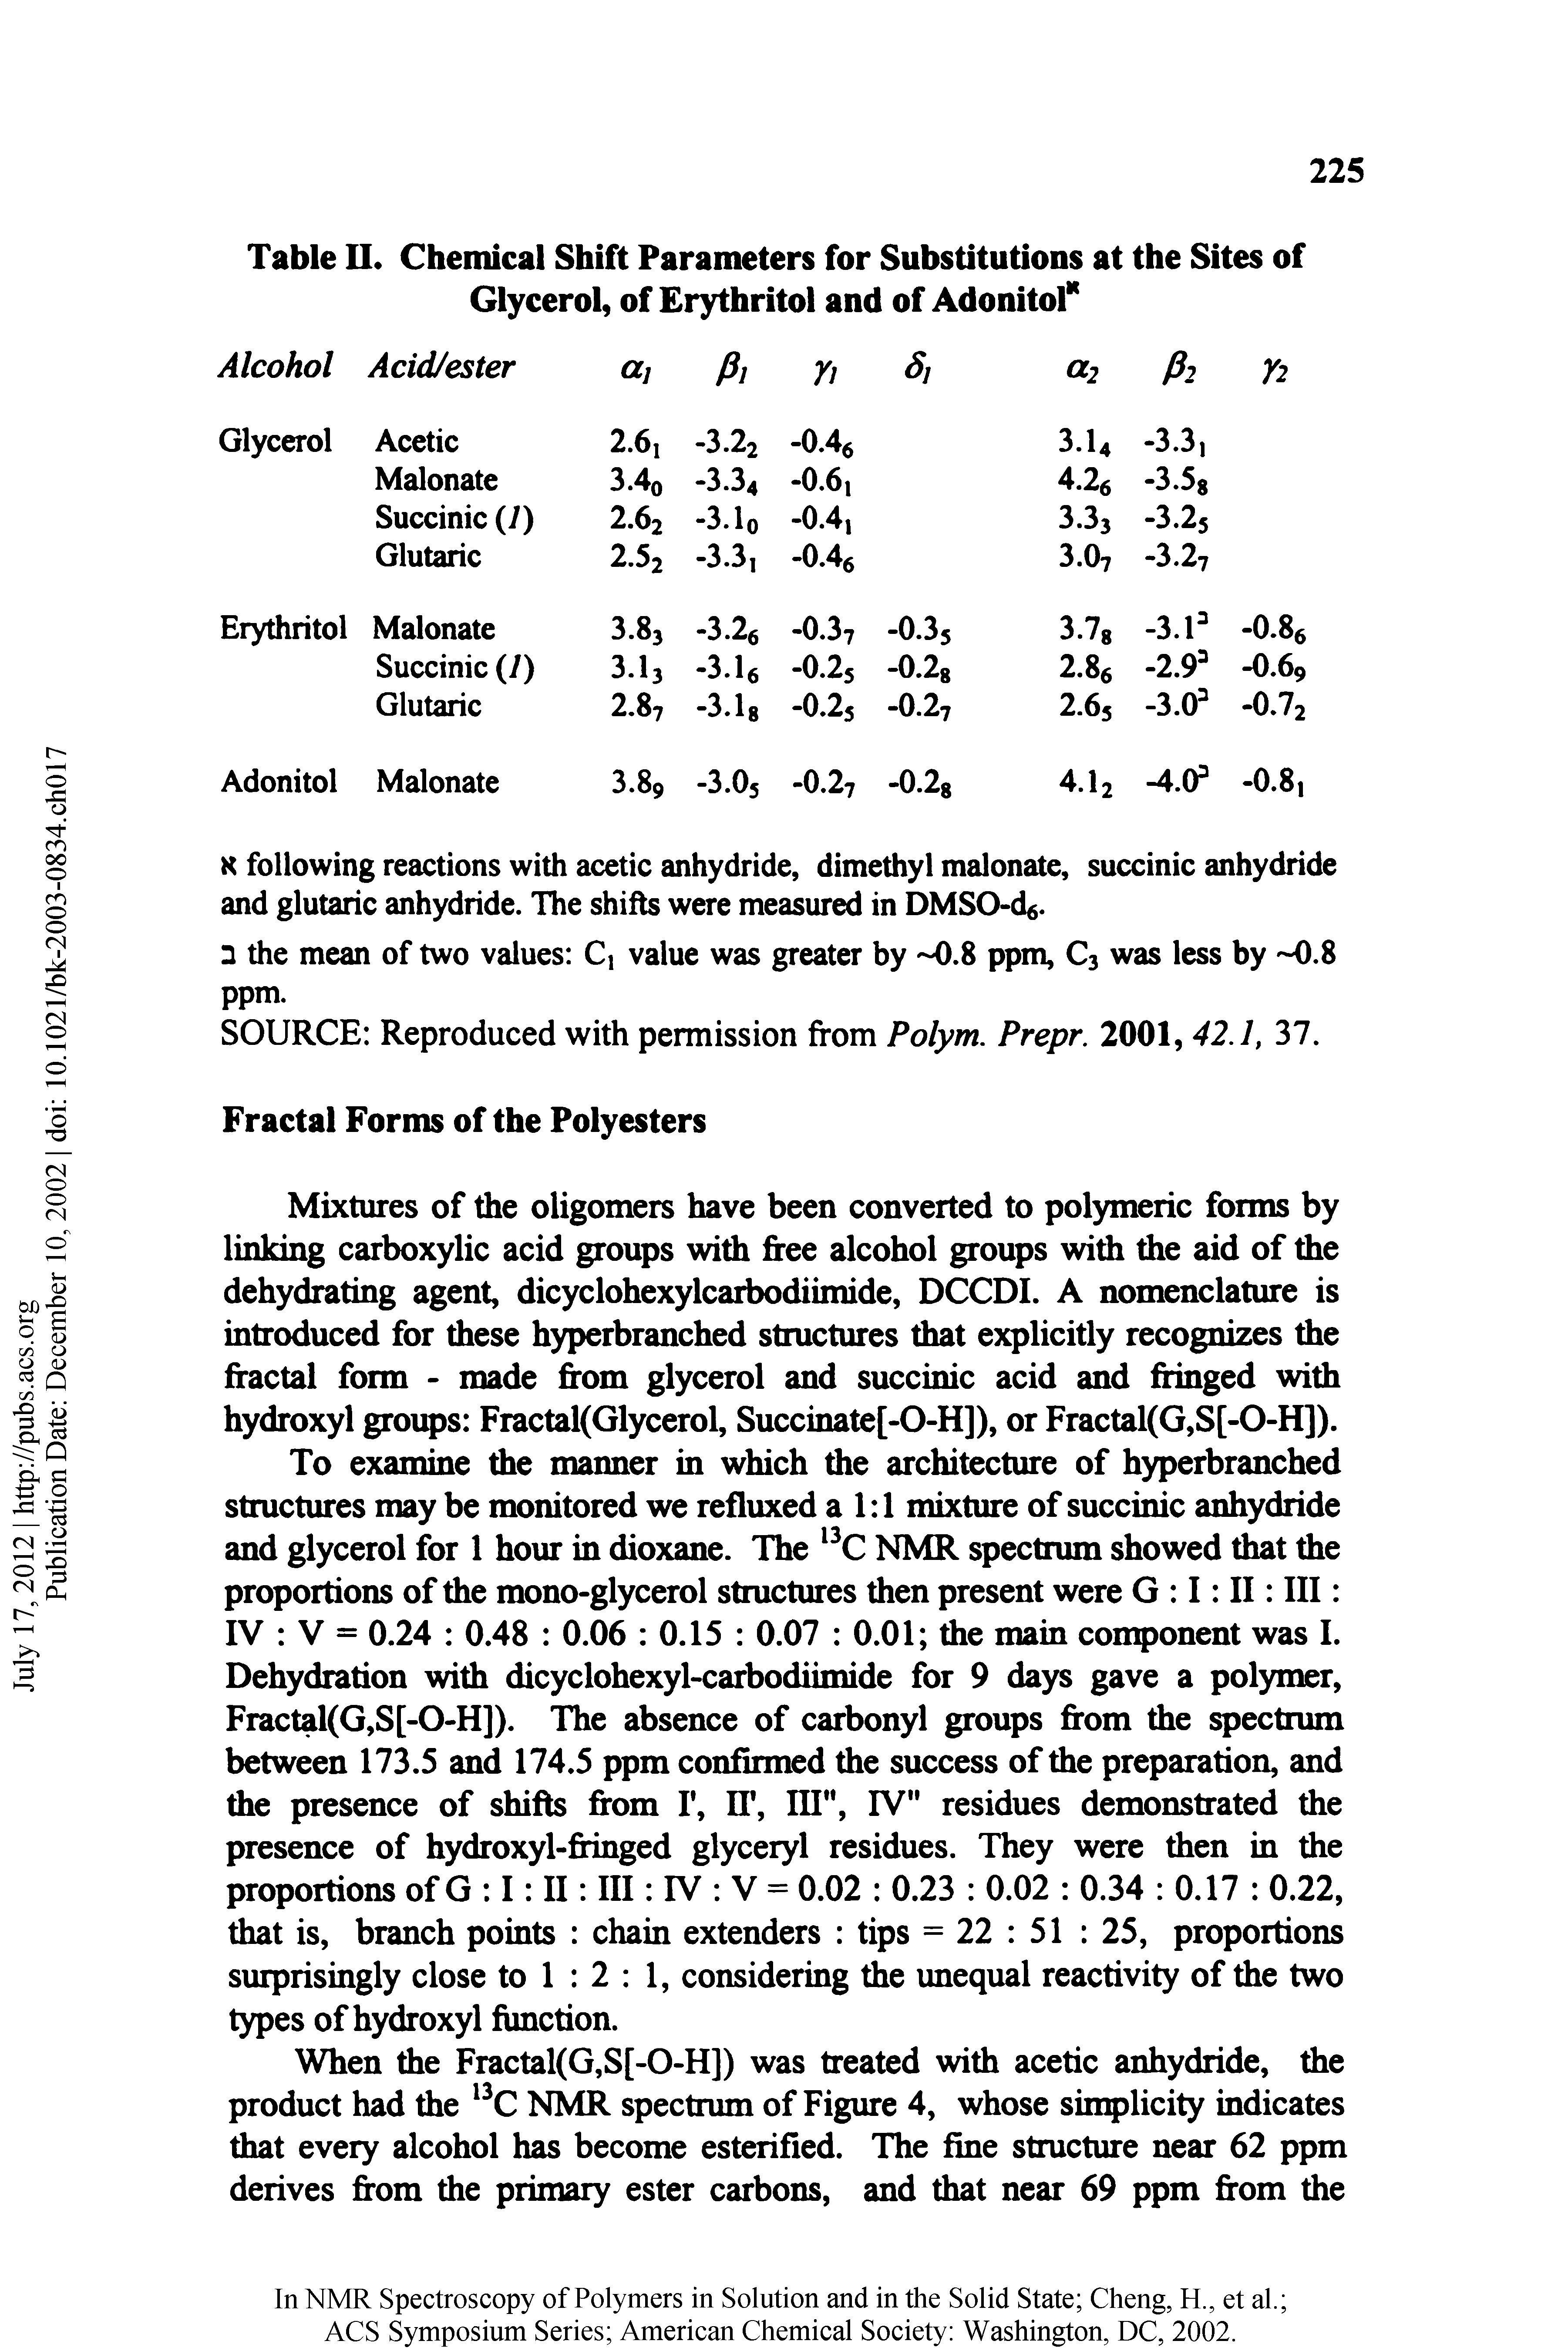 Table II. Chemical Shift Parameters for Substitutions at the Sites of Glycerol, of Erythritol and of Adonitor...